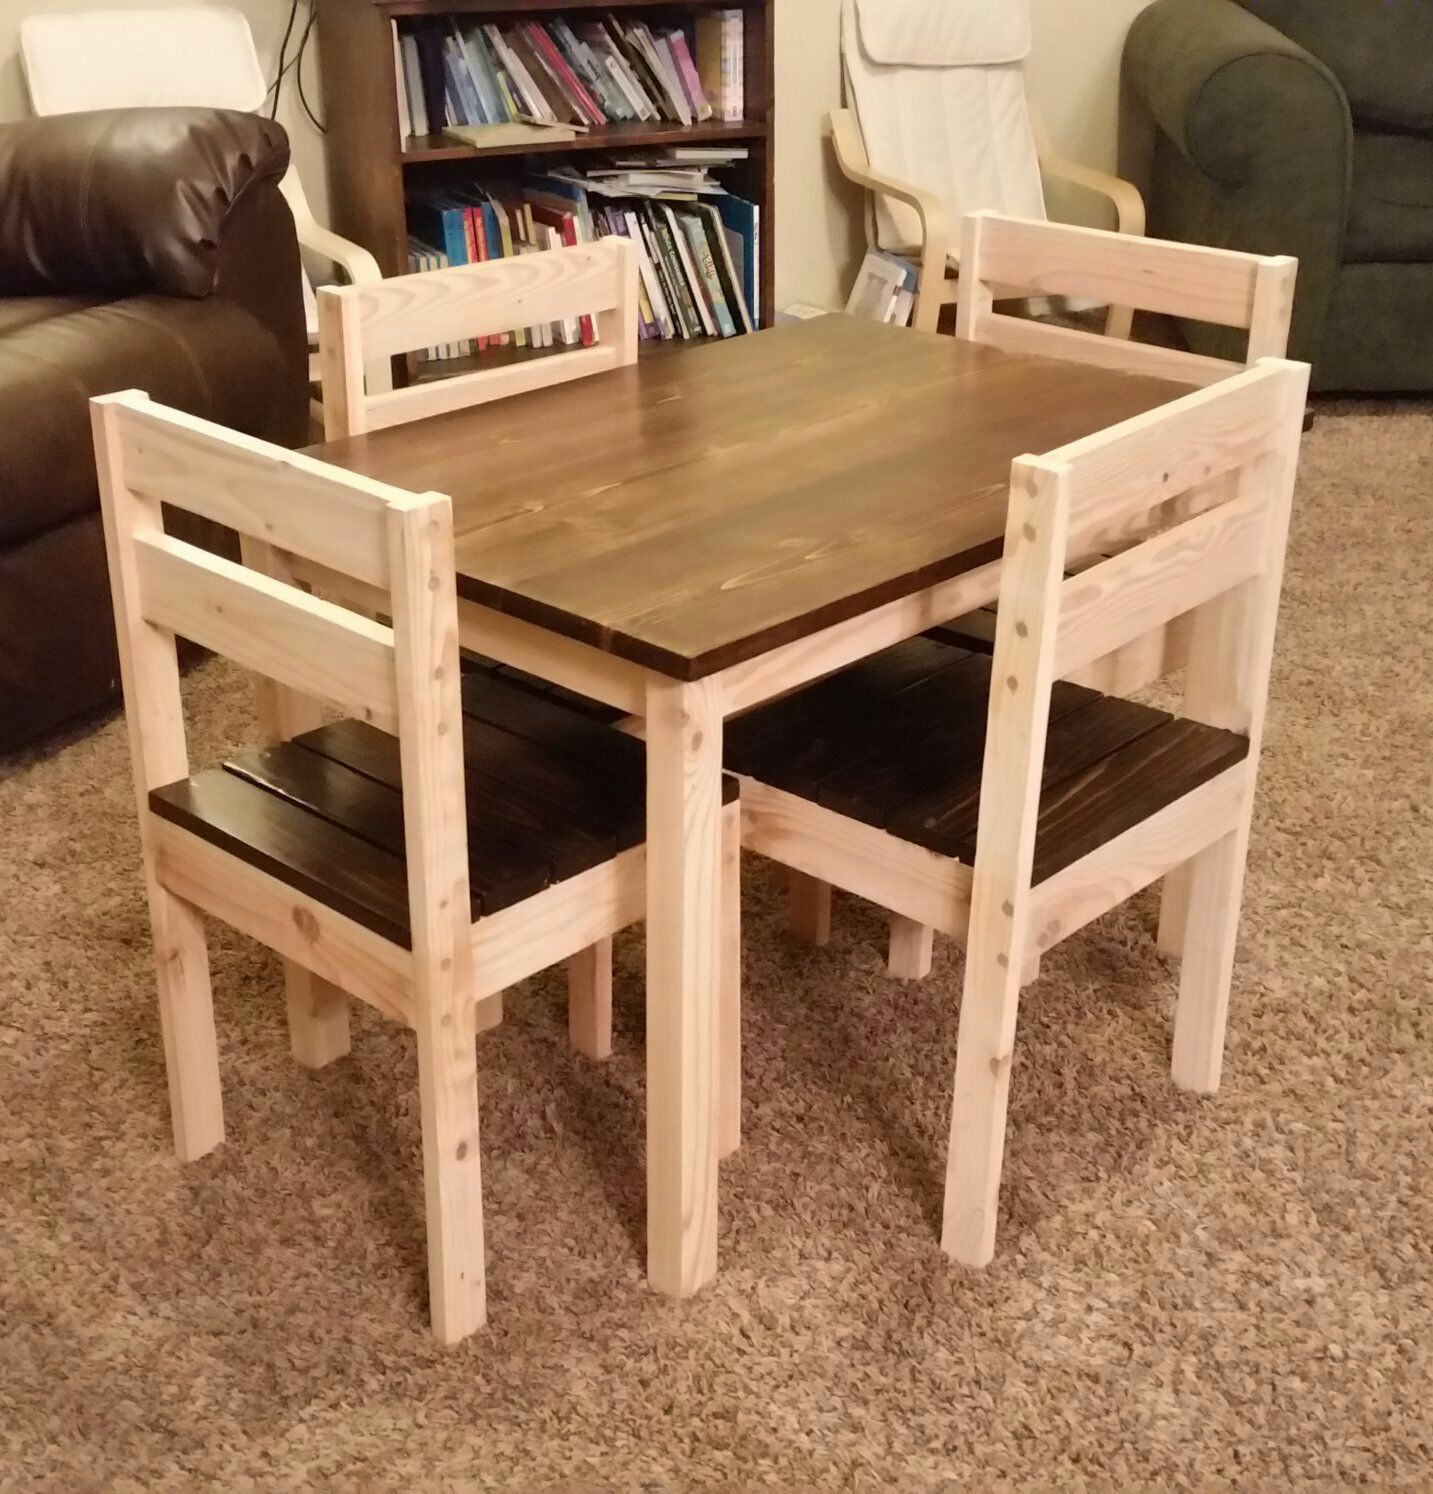 DIY Kids Tables
 Kids table and chairs